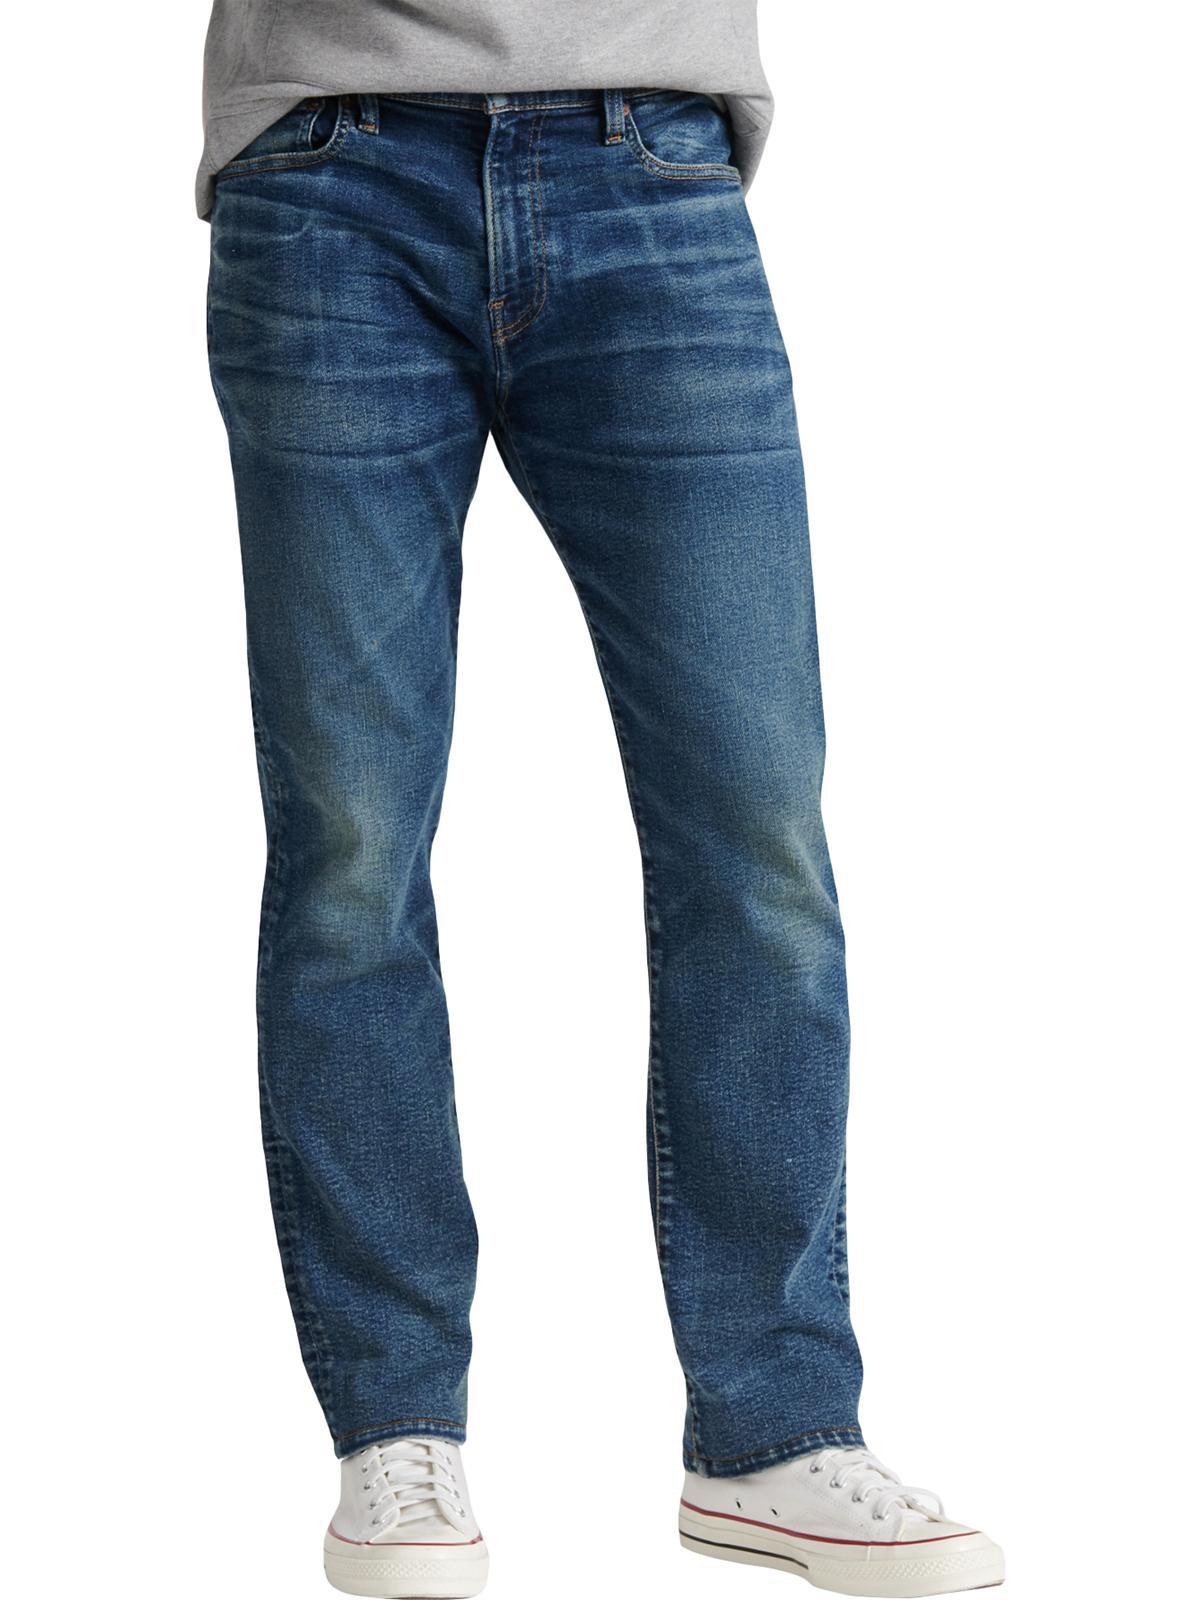 Lucky Brand Mens 223 Slim Mid-Rise Straight Leg Jeans - image 1 of 2